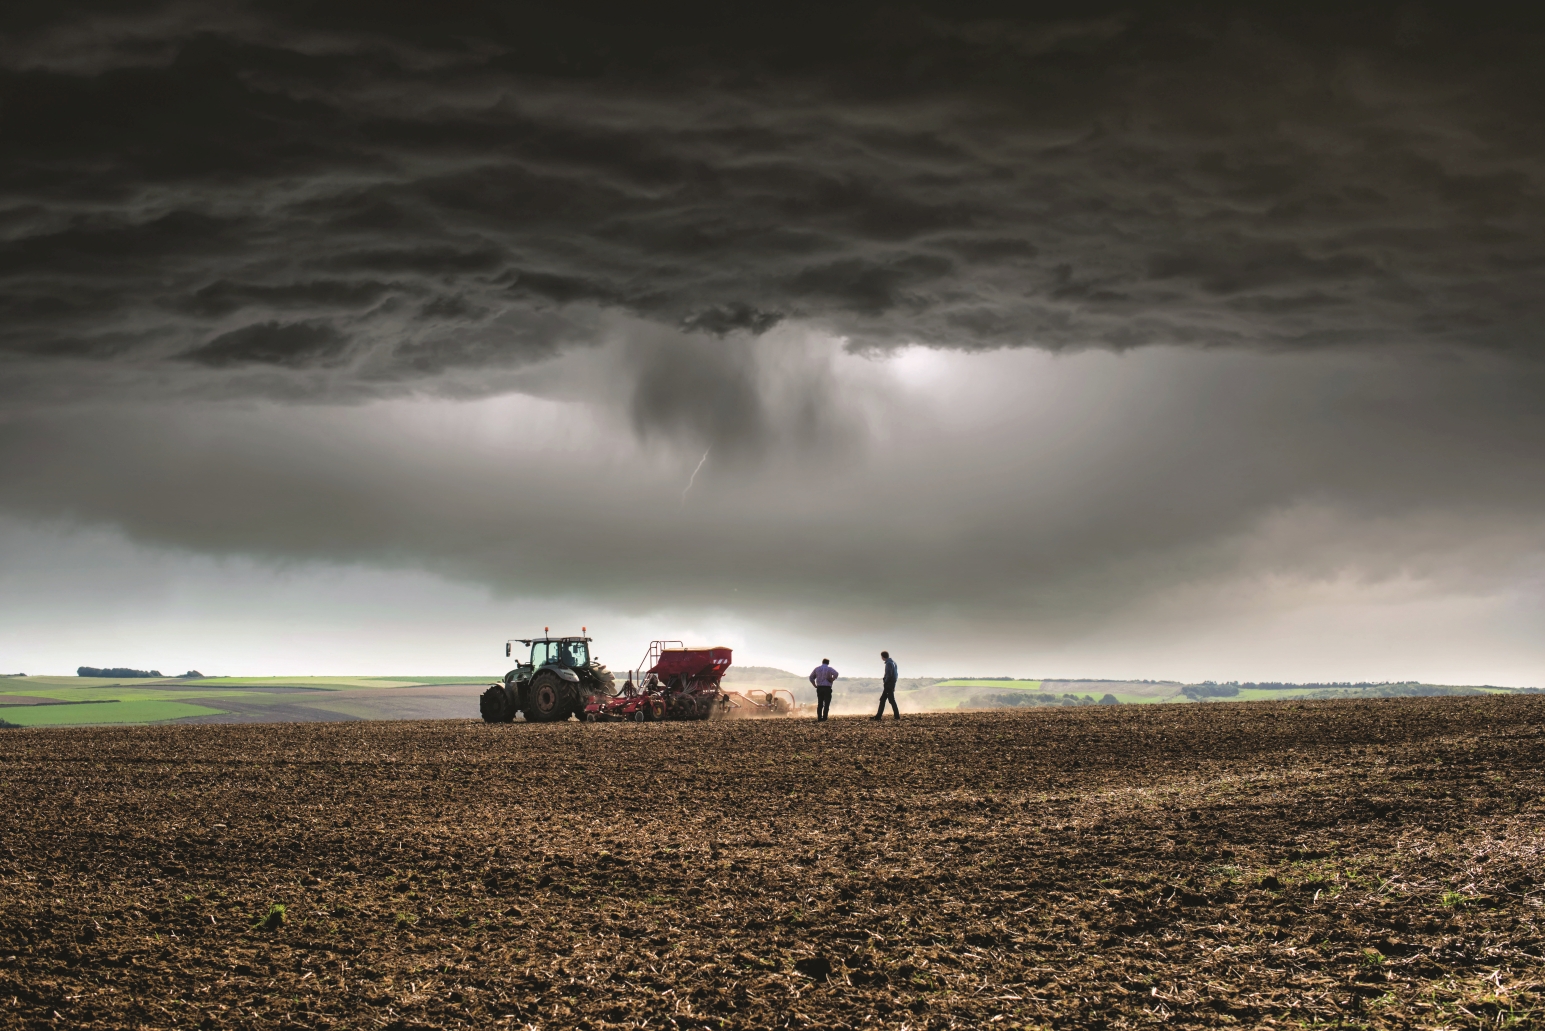 The picture shows a field in the foreground. A tractor is sowing and two men are checking the sowing. In the background, a wider agricultural landscape can be seen. The sky is very dark, a thunderstorm is approaching.